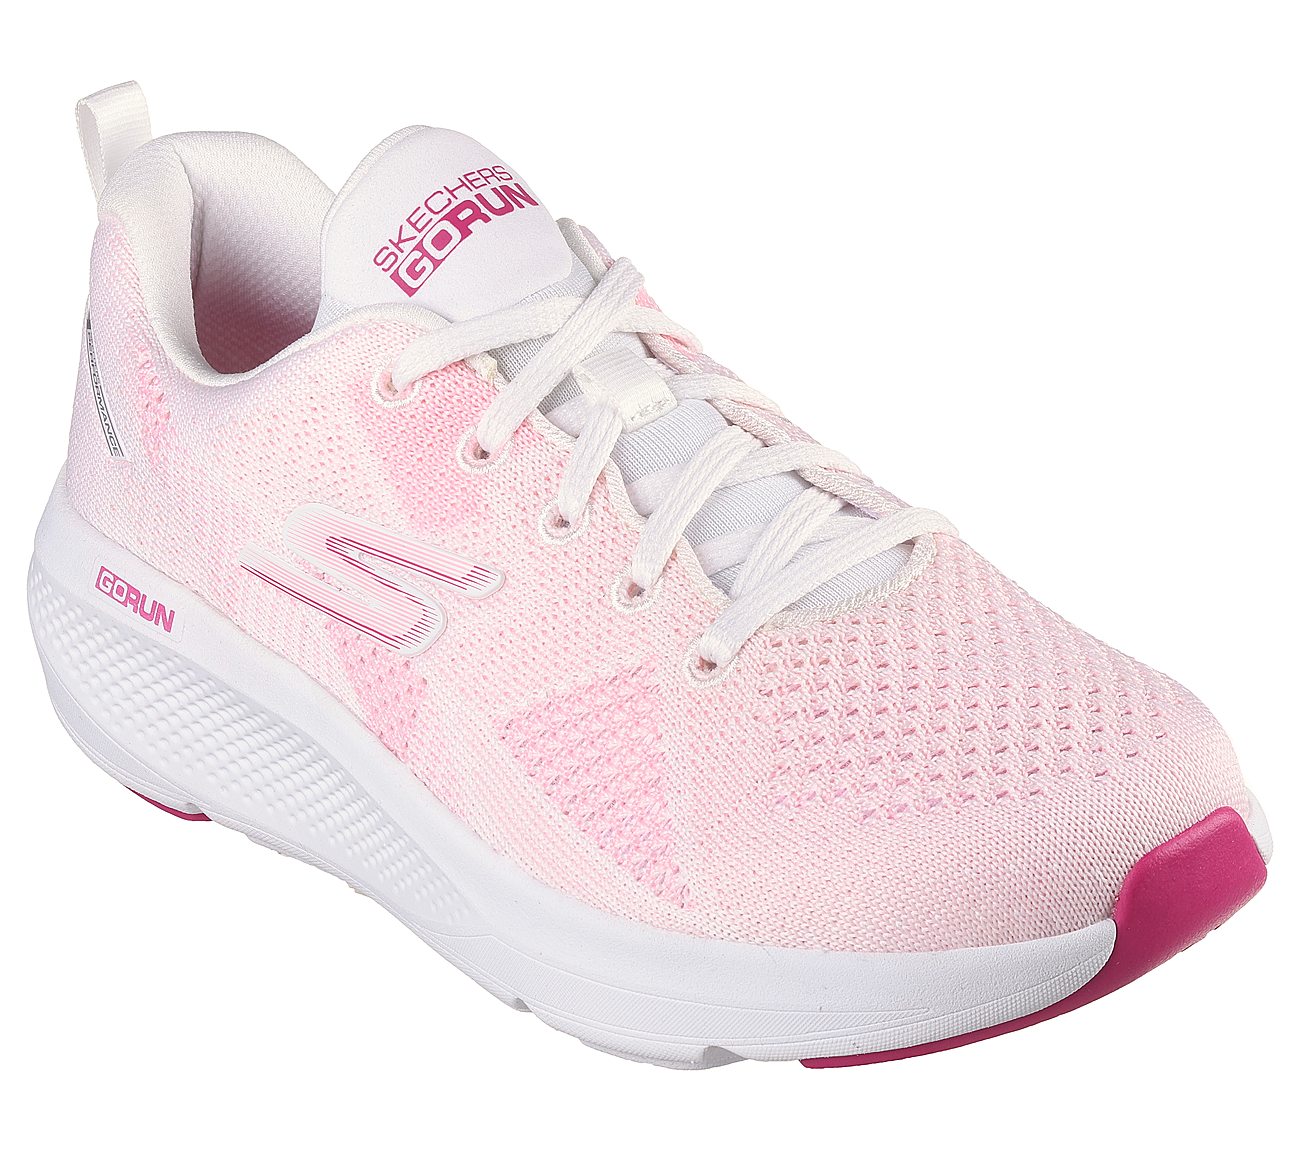 GO RUN ELEVATE, WHITE/PINK Footwear Right View